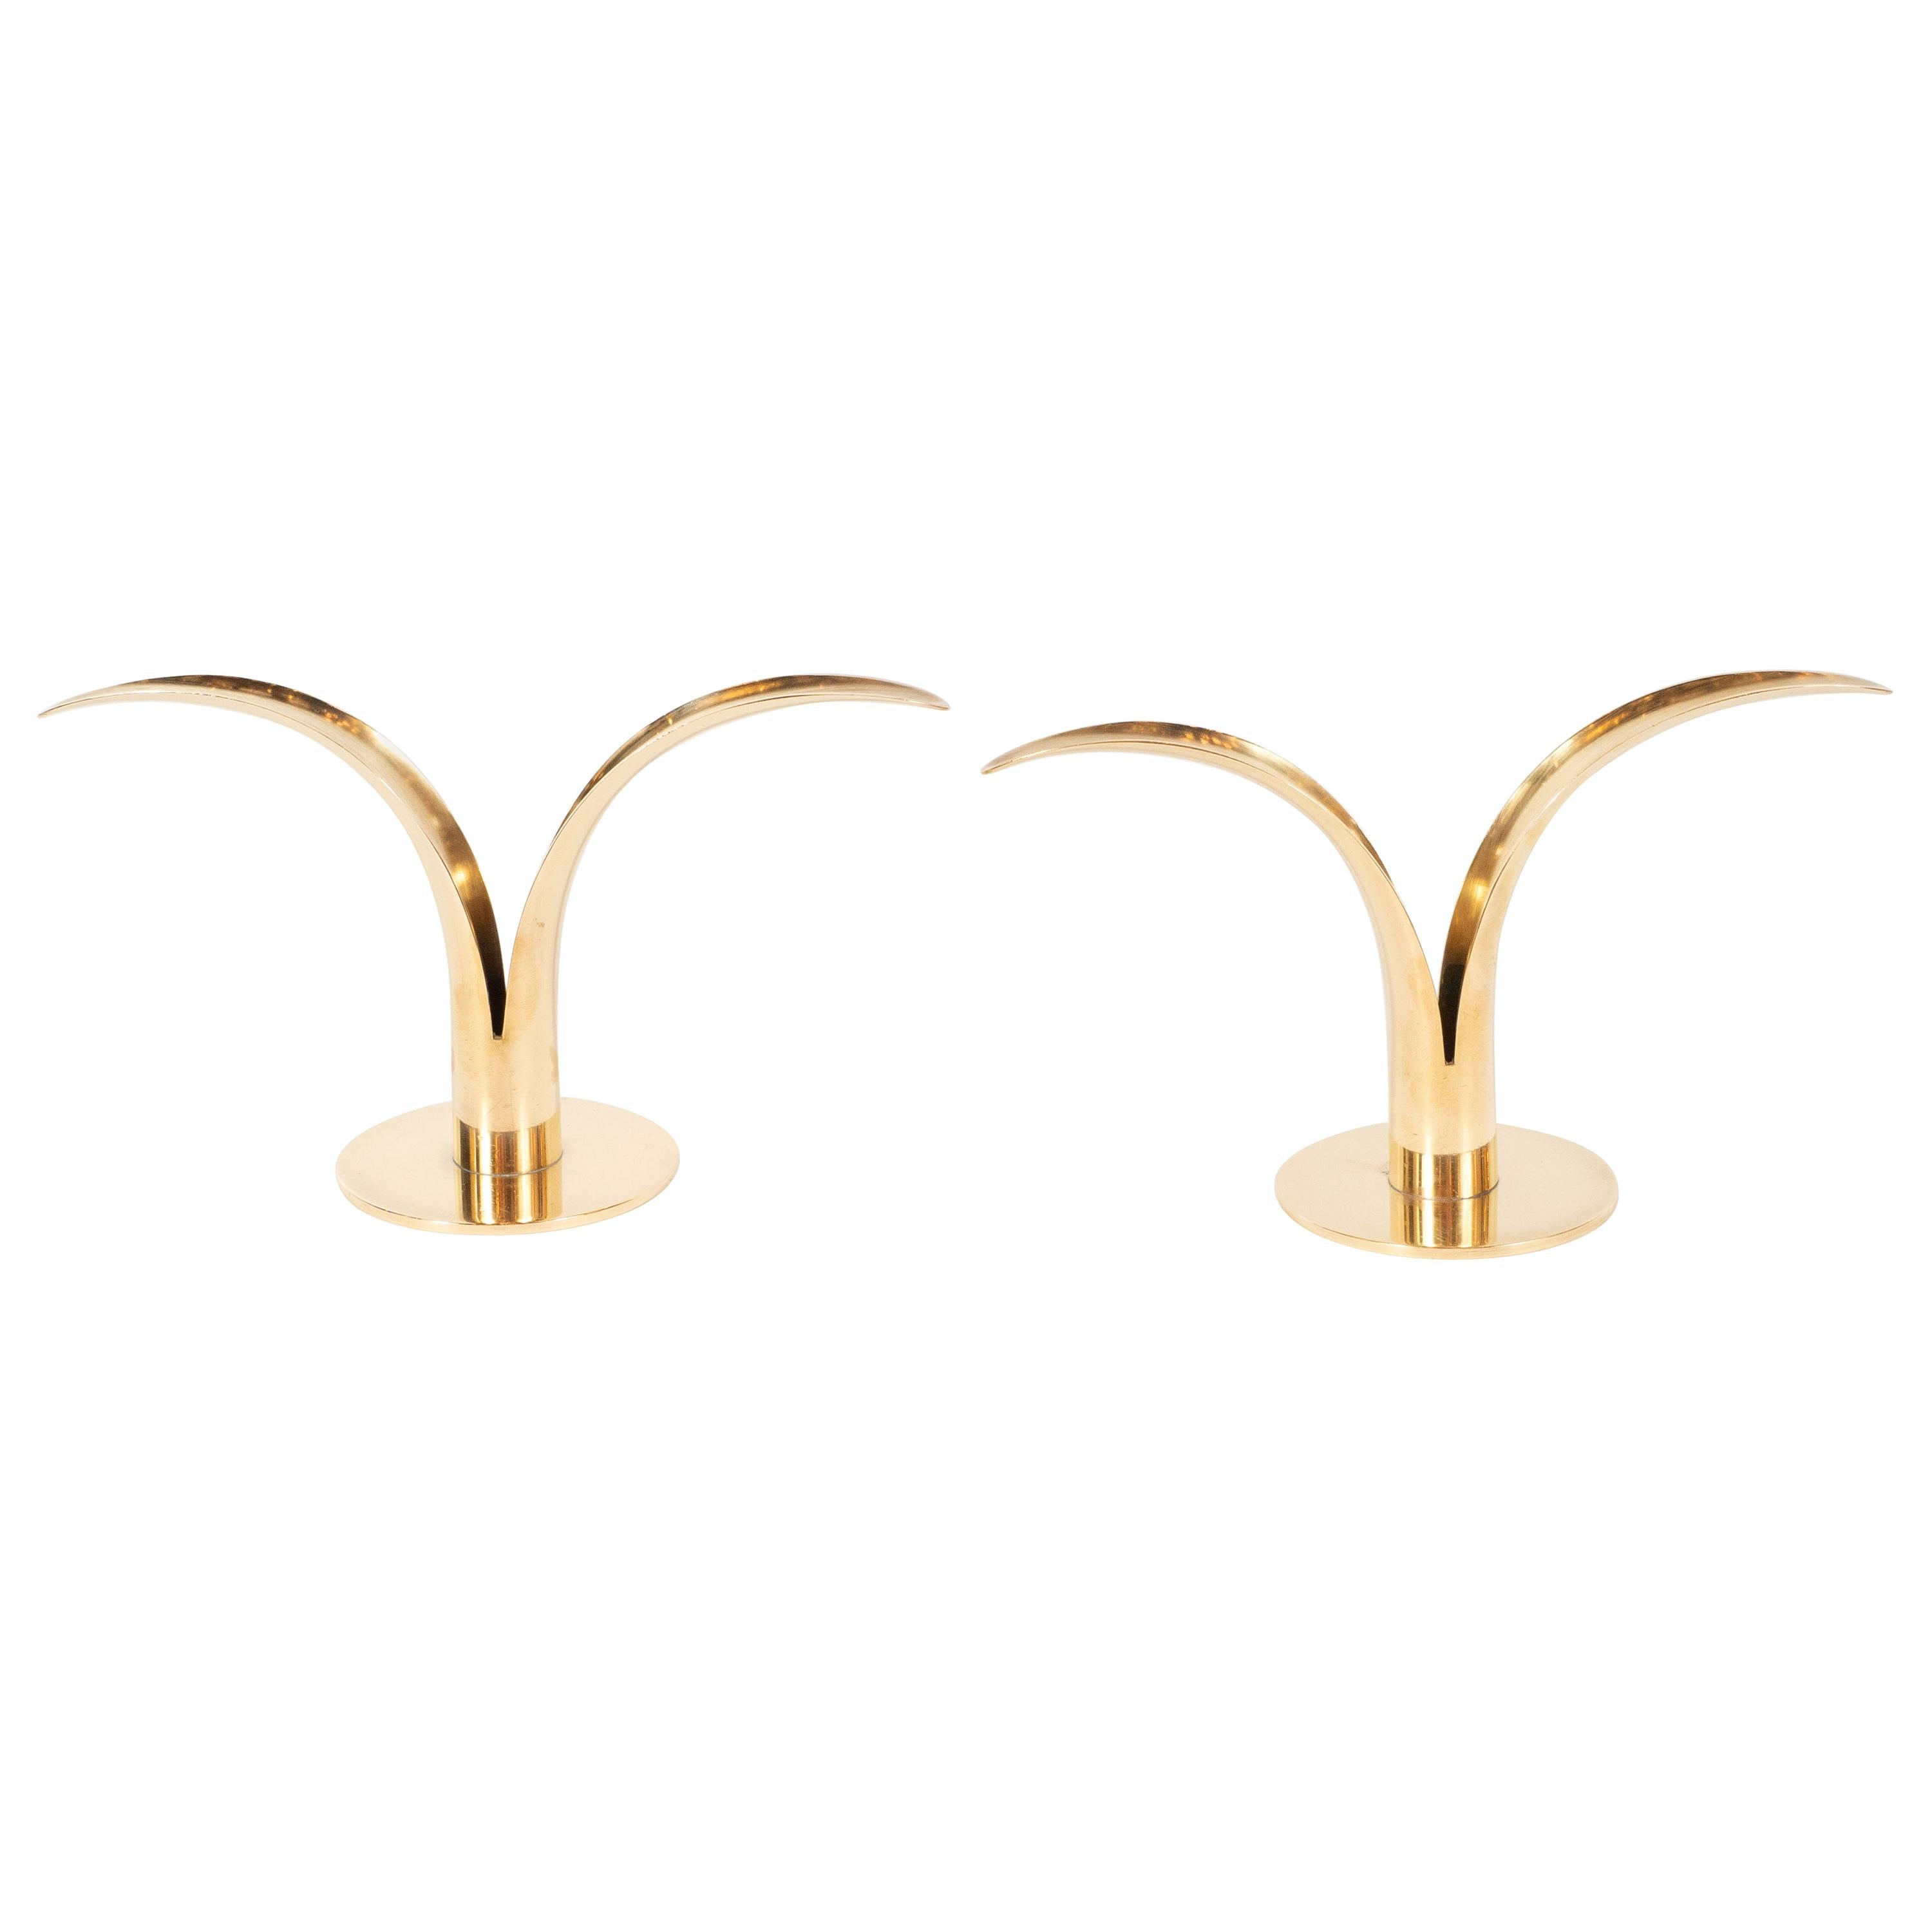 Pair of Mid-Century Modern Polished Brass Lily Candleholders by Konst of Sweden